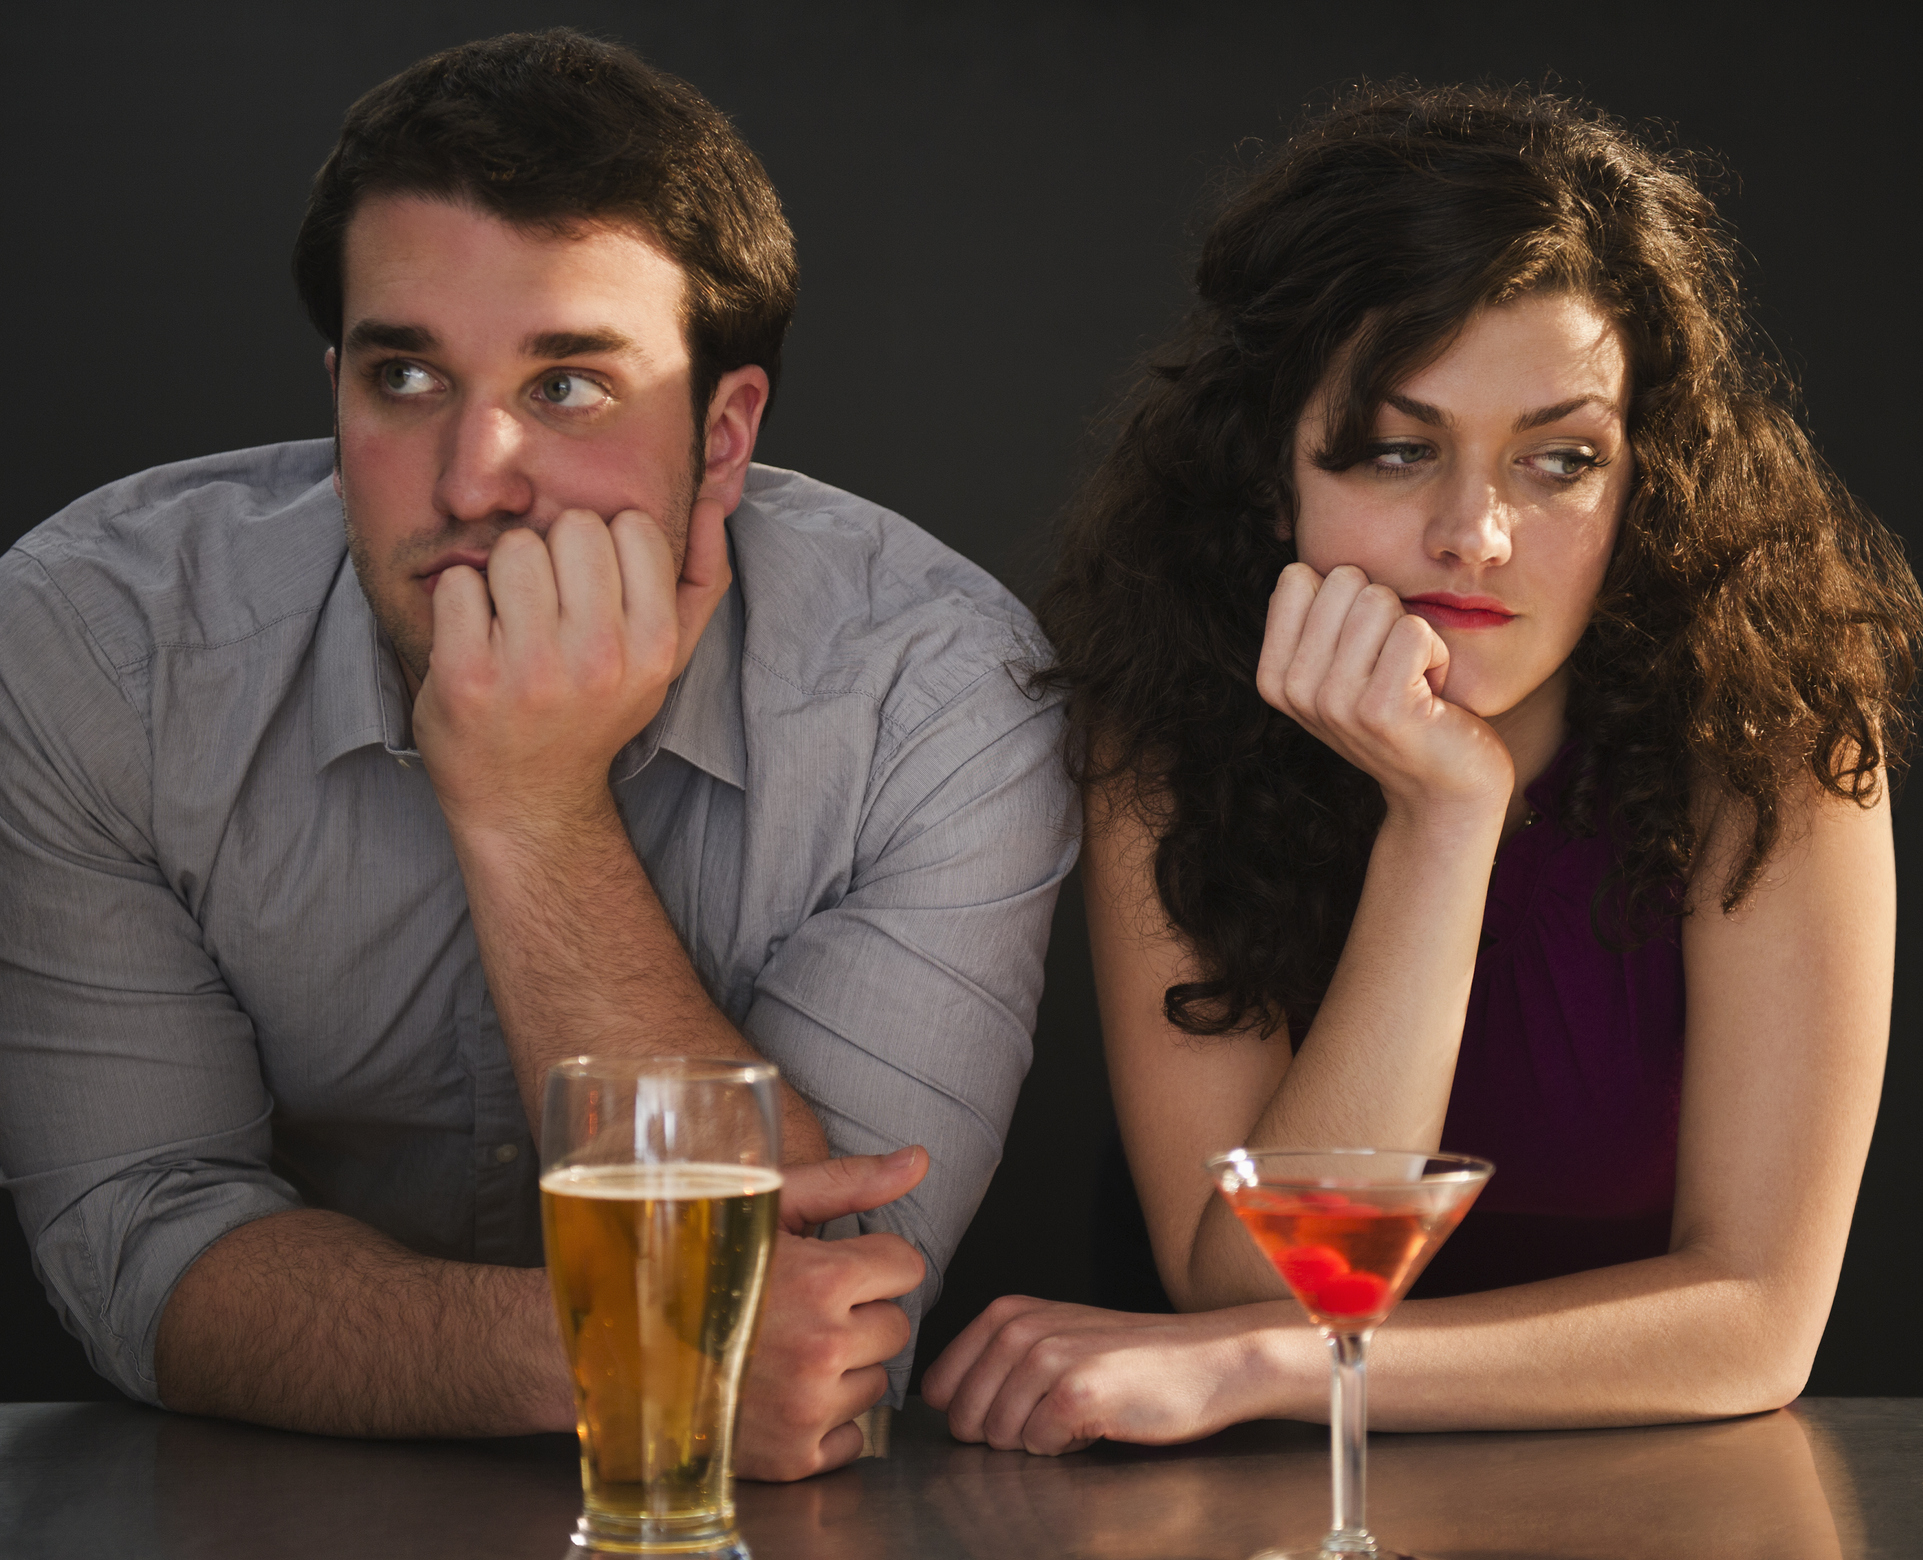 USA, New Jersey, Jersey City, Bored couple sitting at bar counter